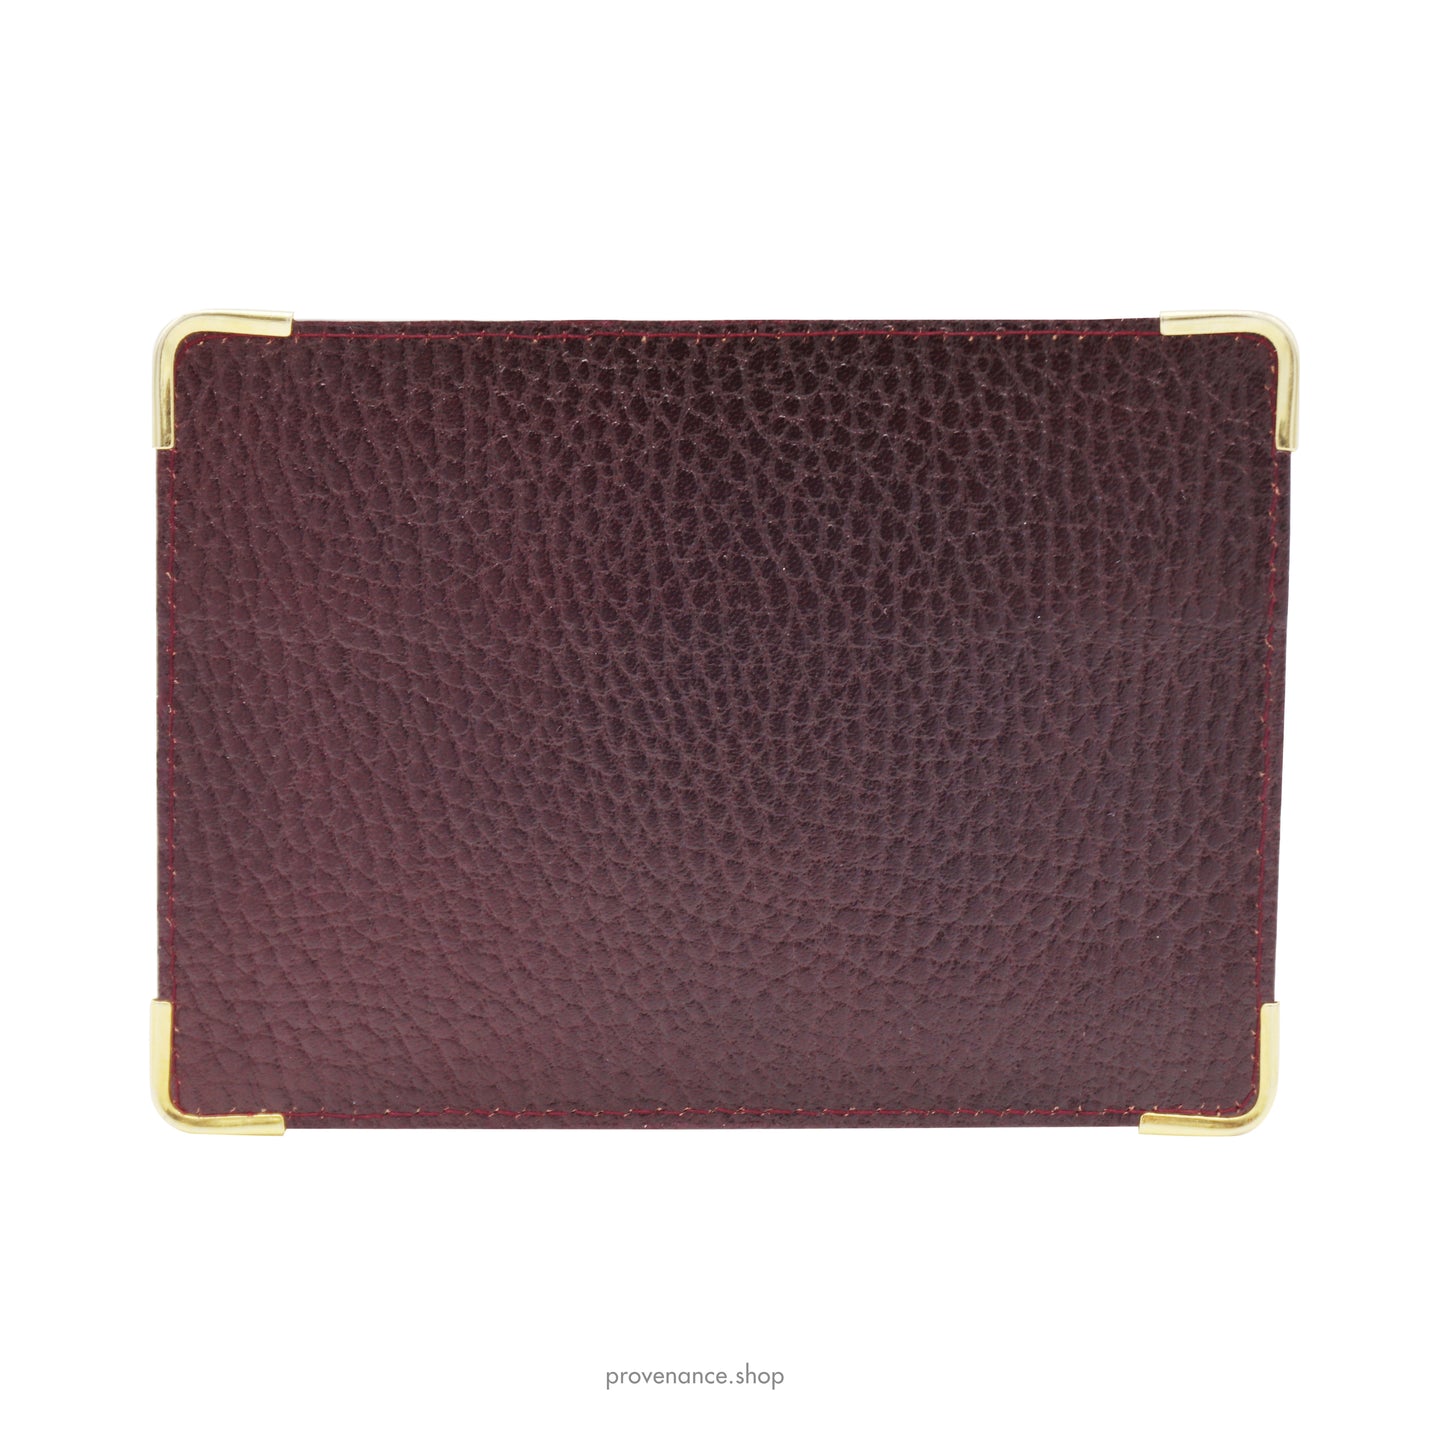 Rolex Card Holder Wallet - Grained Acajou Leather